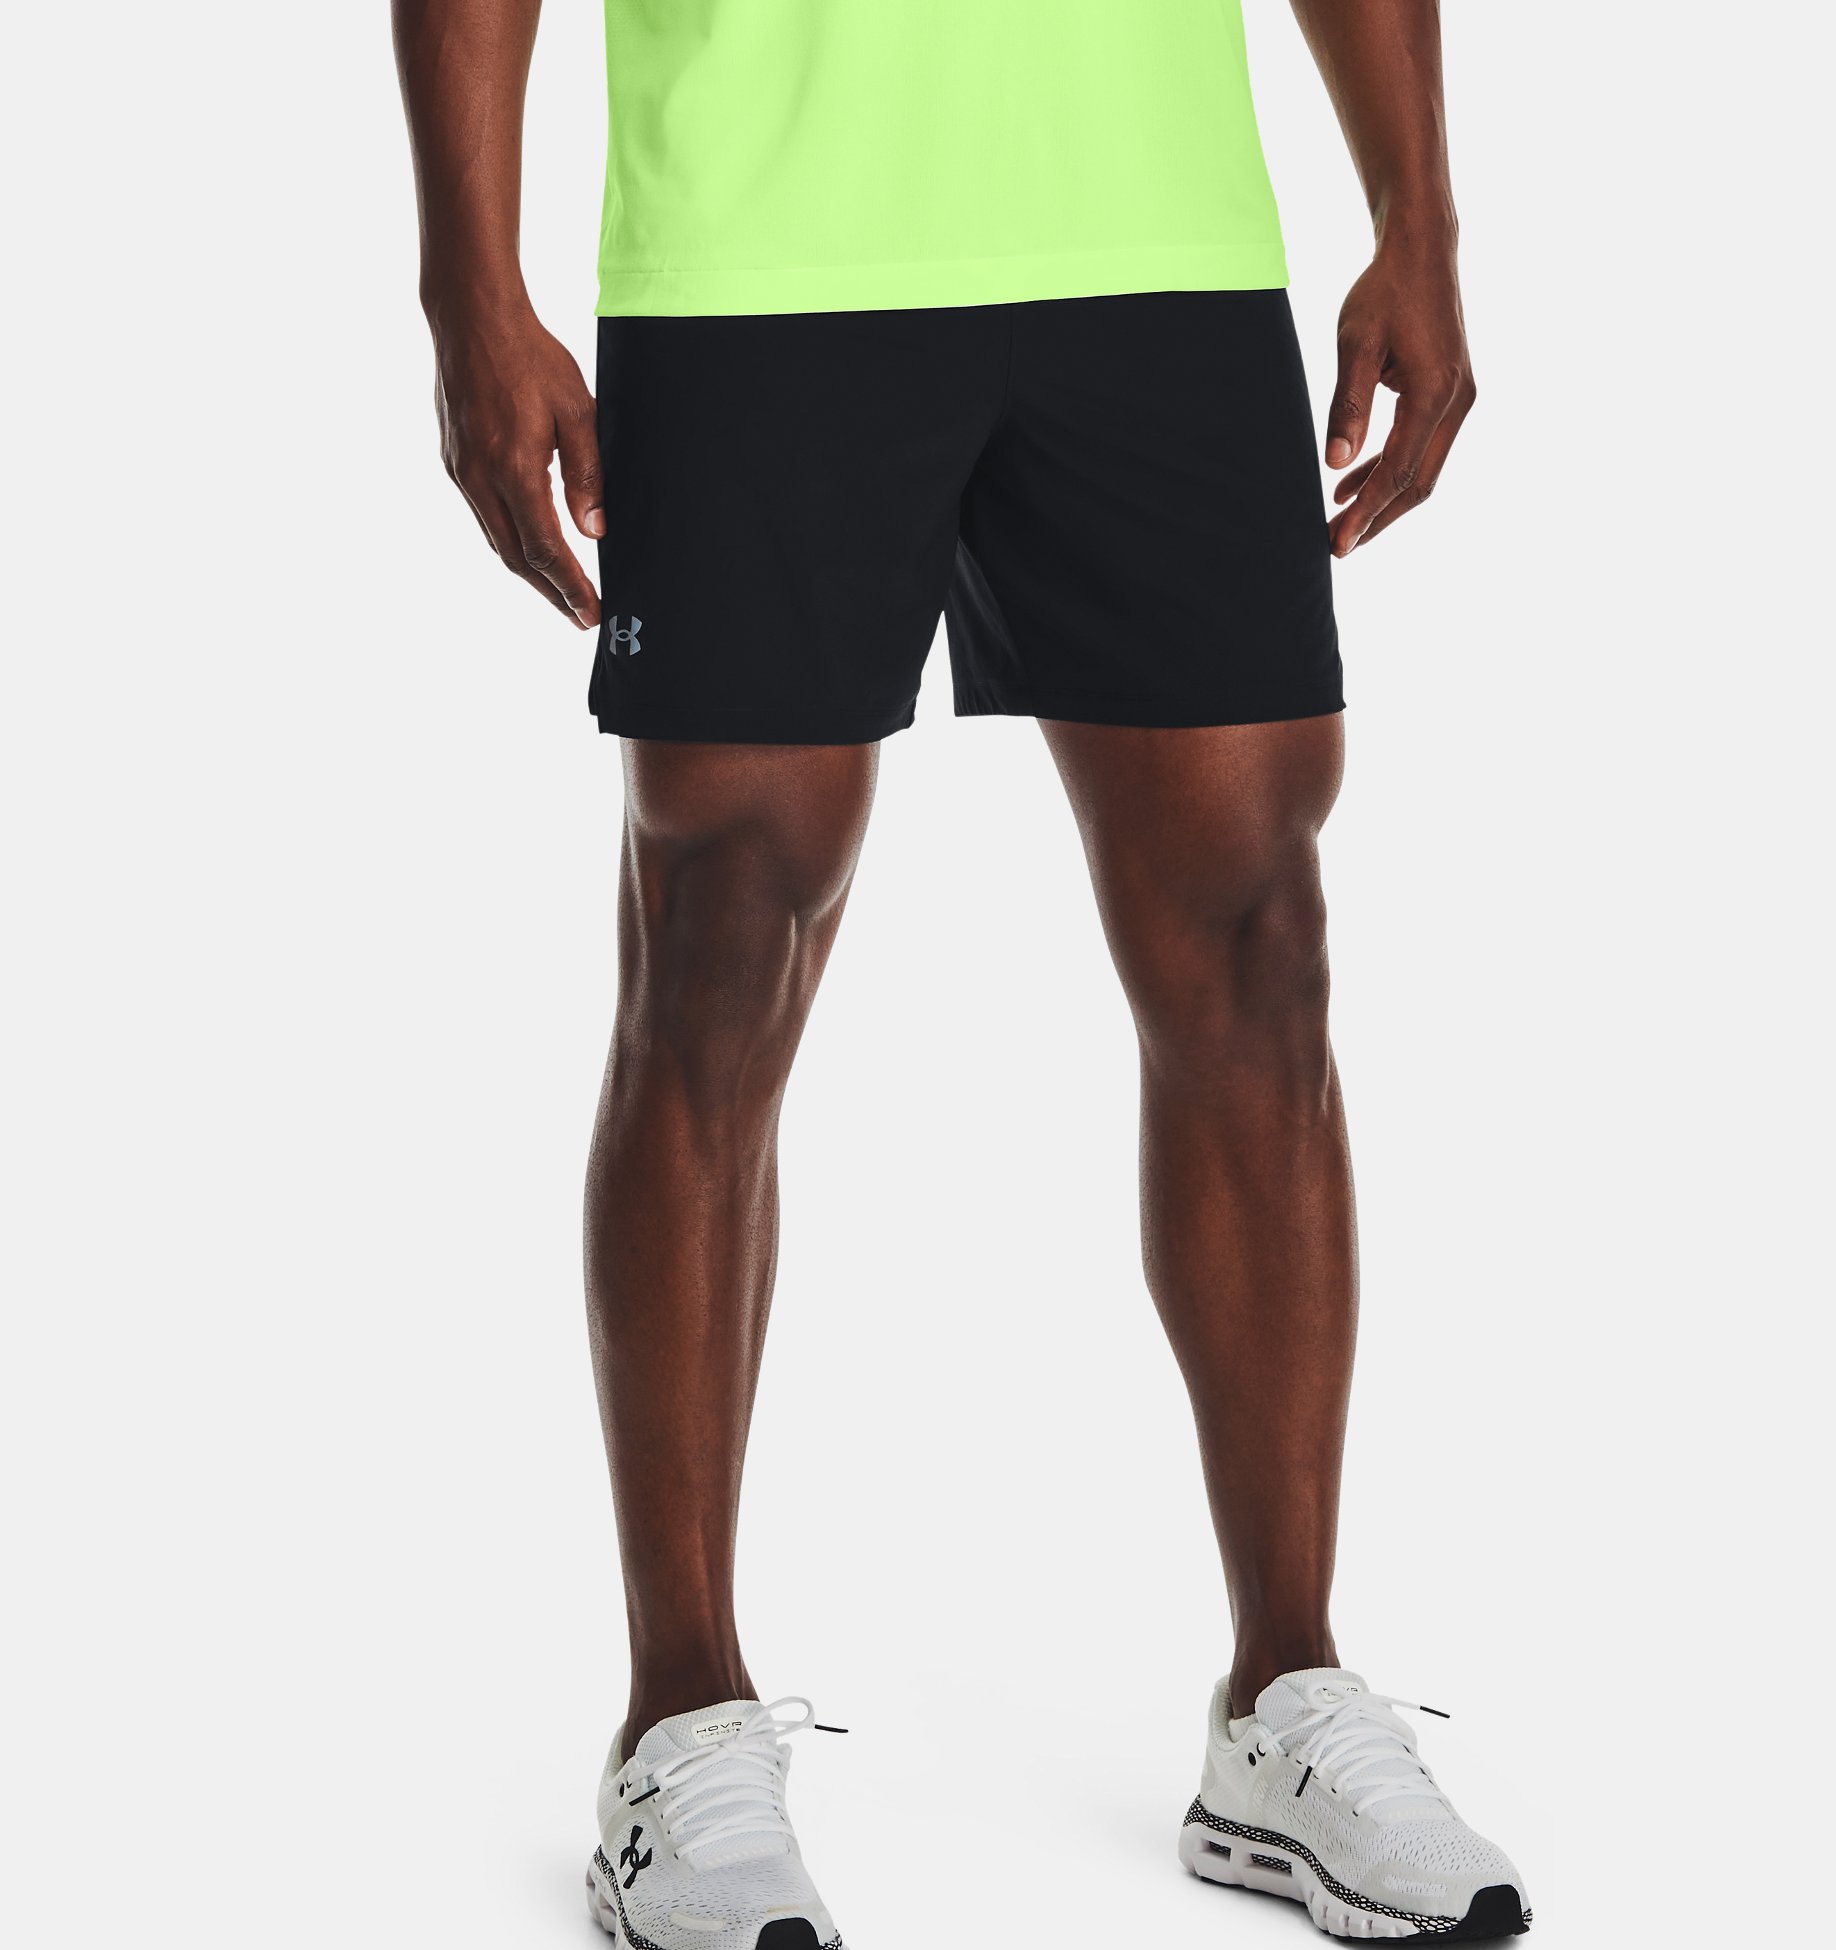 FREE SHIPPING Under Armour Men's Athletic Basketball Gym No Pocket Shorts 0088 